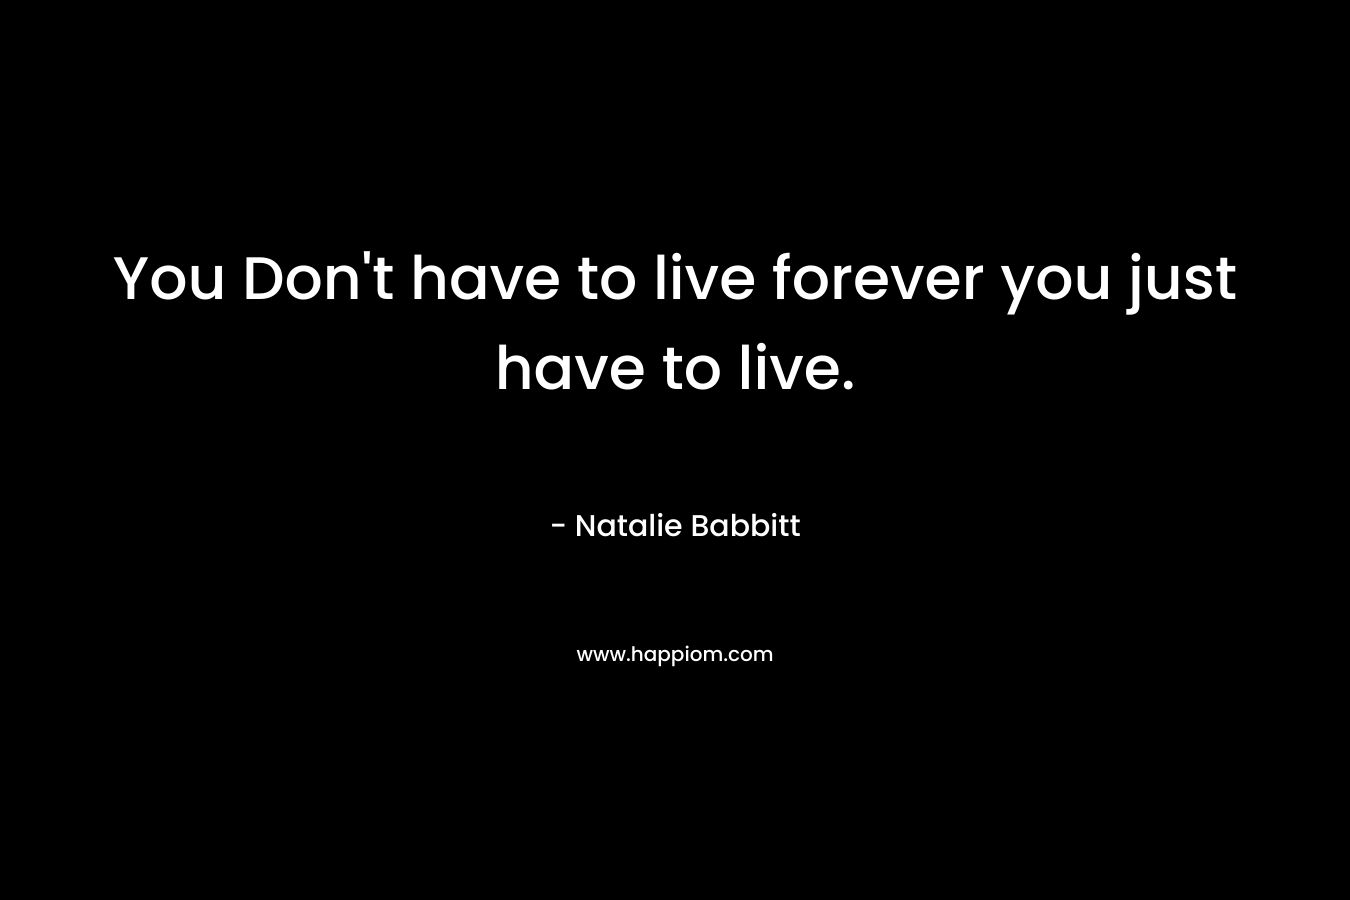 You Don't have to live forever you just have to live.